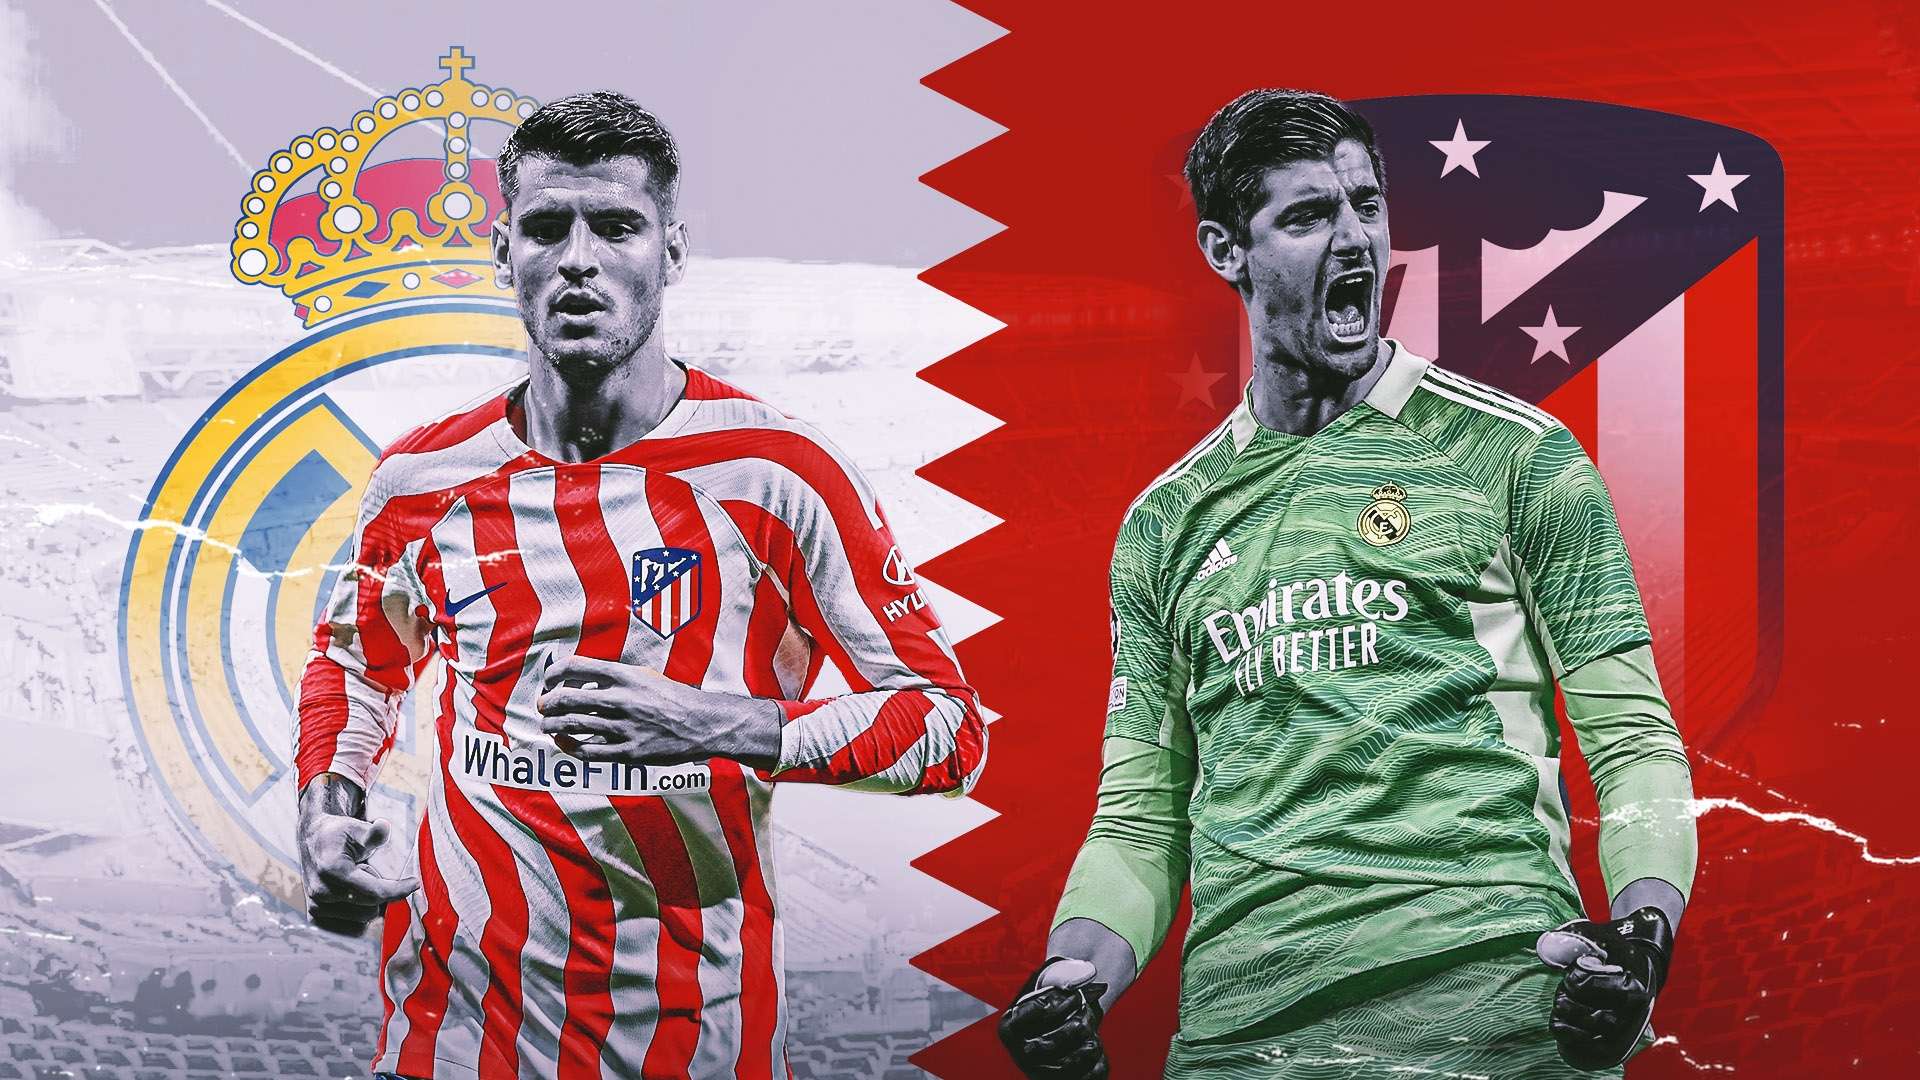 Alvaro Morata and Thibaut Courtois played for both Real and Atletico Madrid